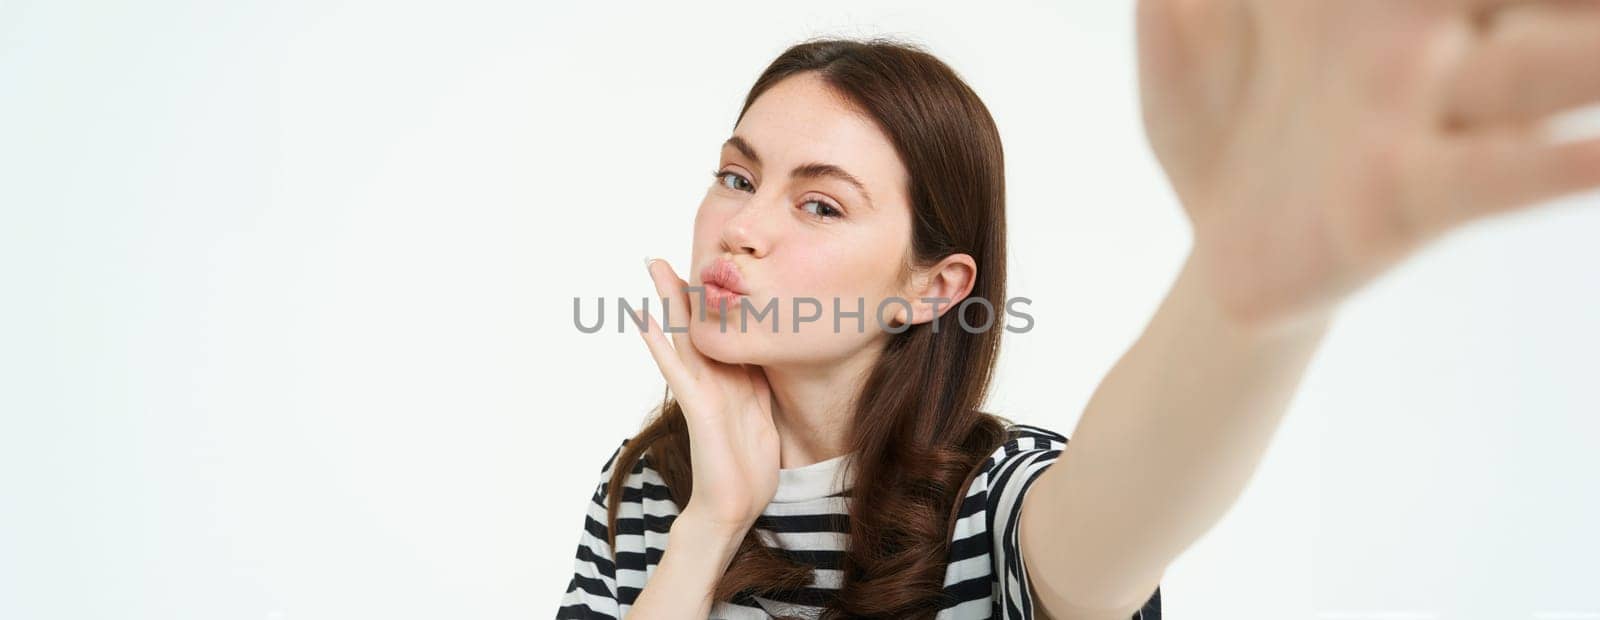 Portrait of cute, feminine girl posing near something, taking selfie on smartphone, holding camera with extended hand, isolated on white background.